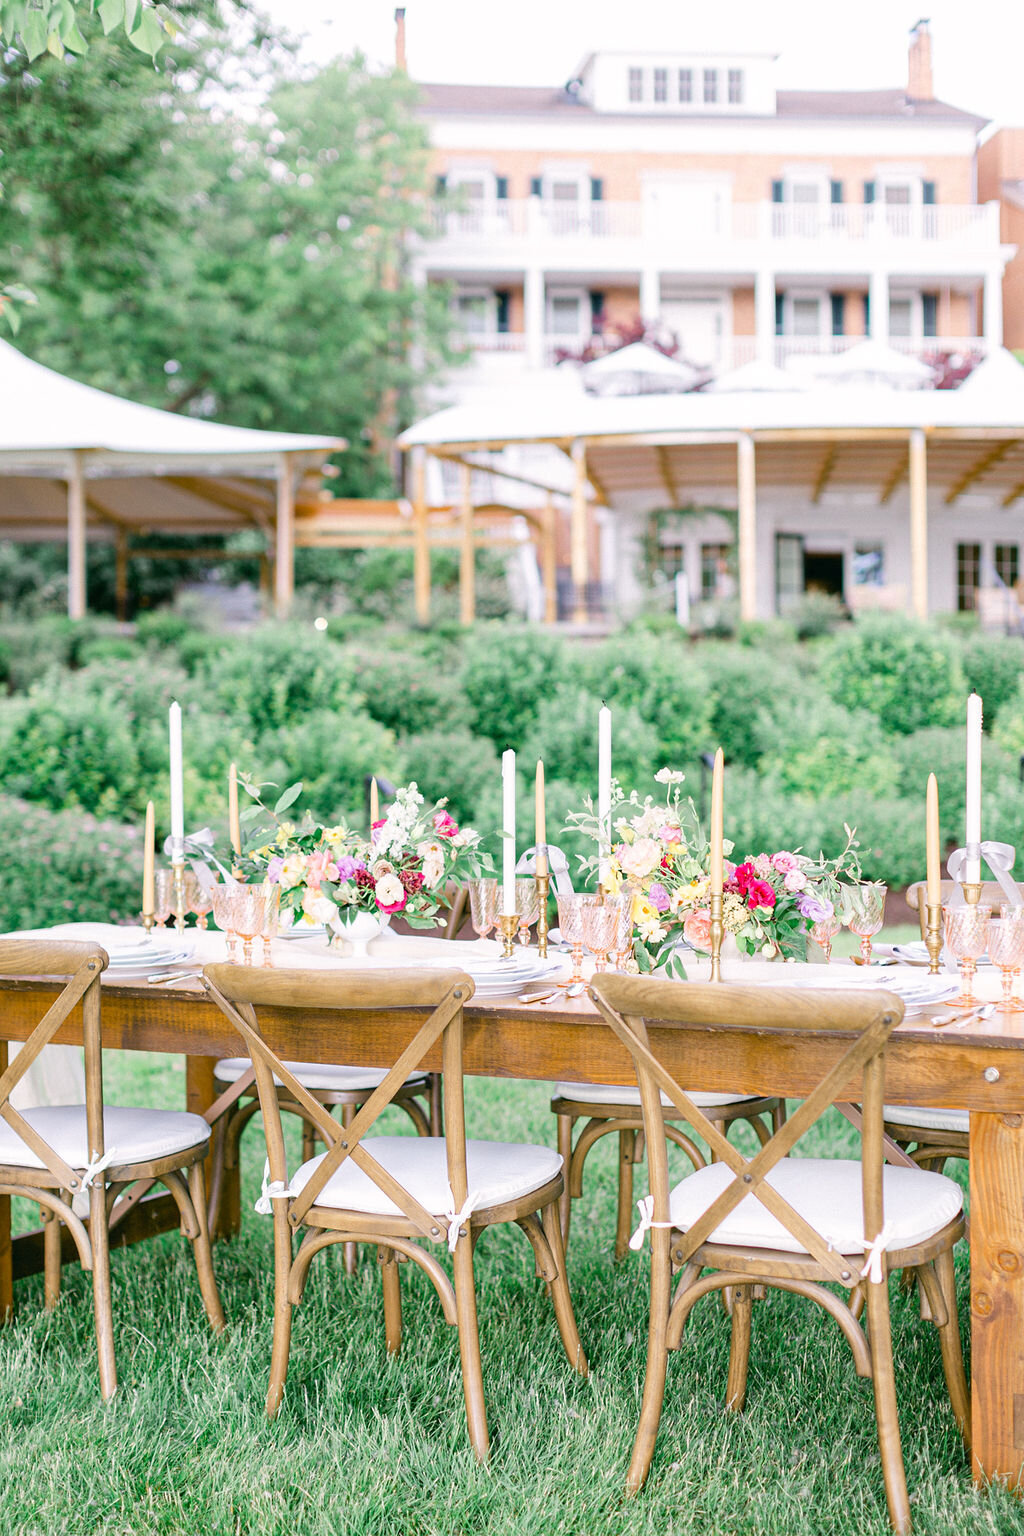 inns-of-aurora-wedding-table-napa-crossback-chairs-romantic-tablescape